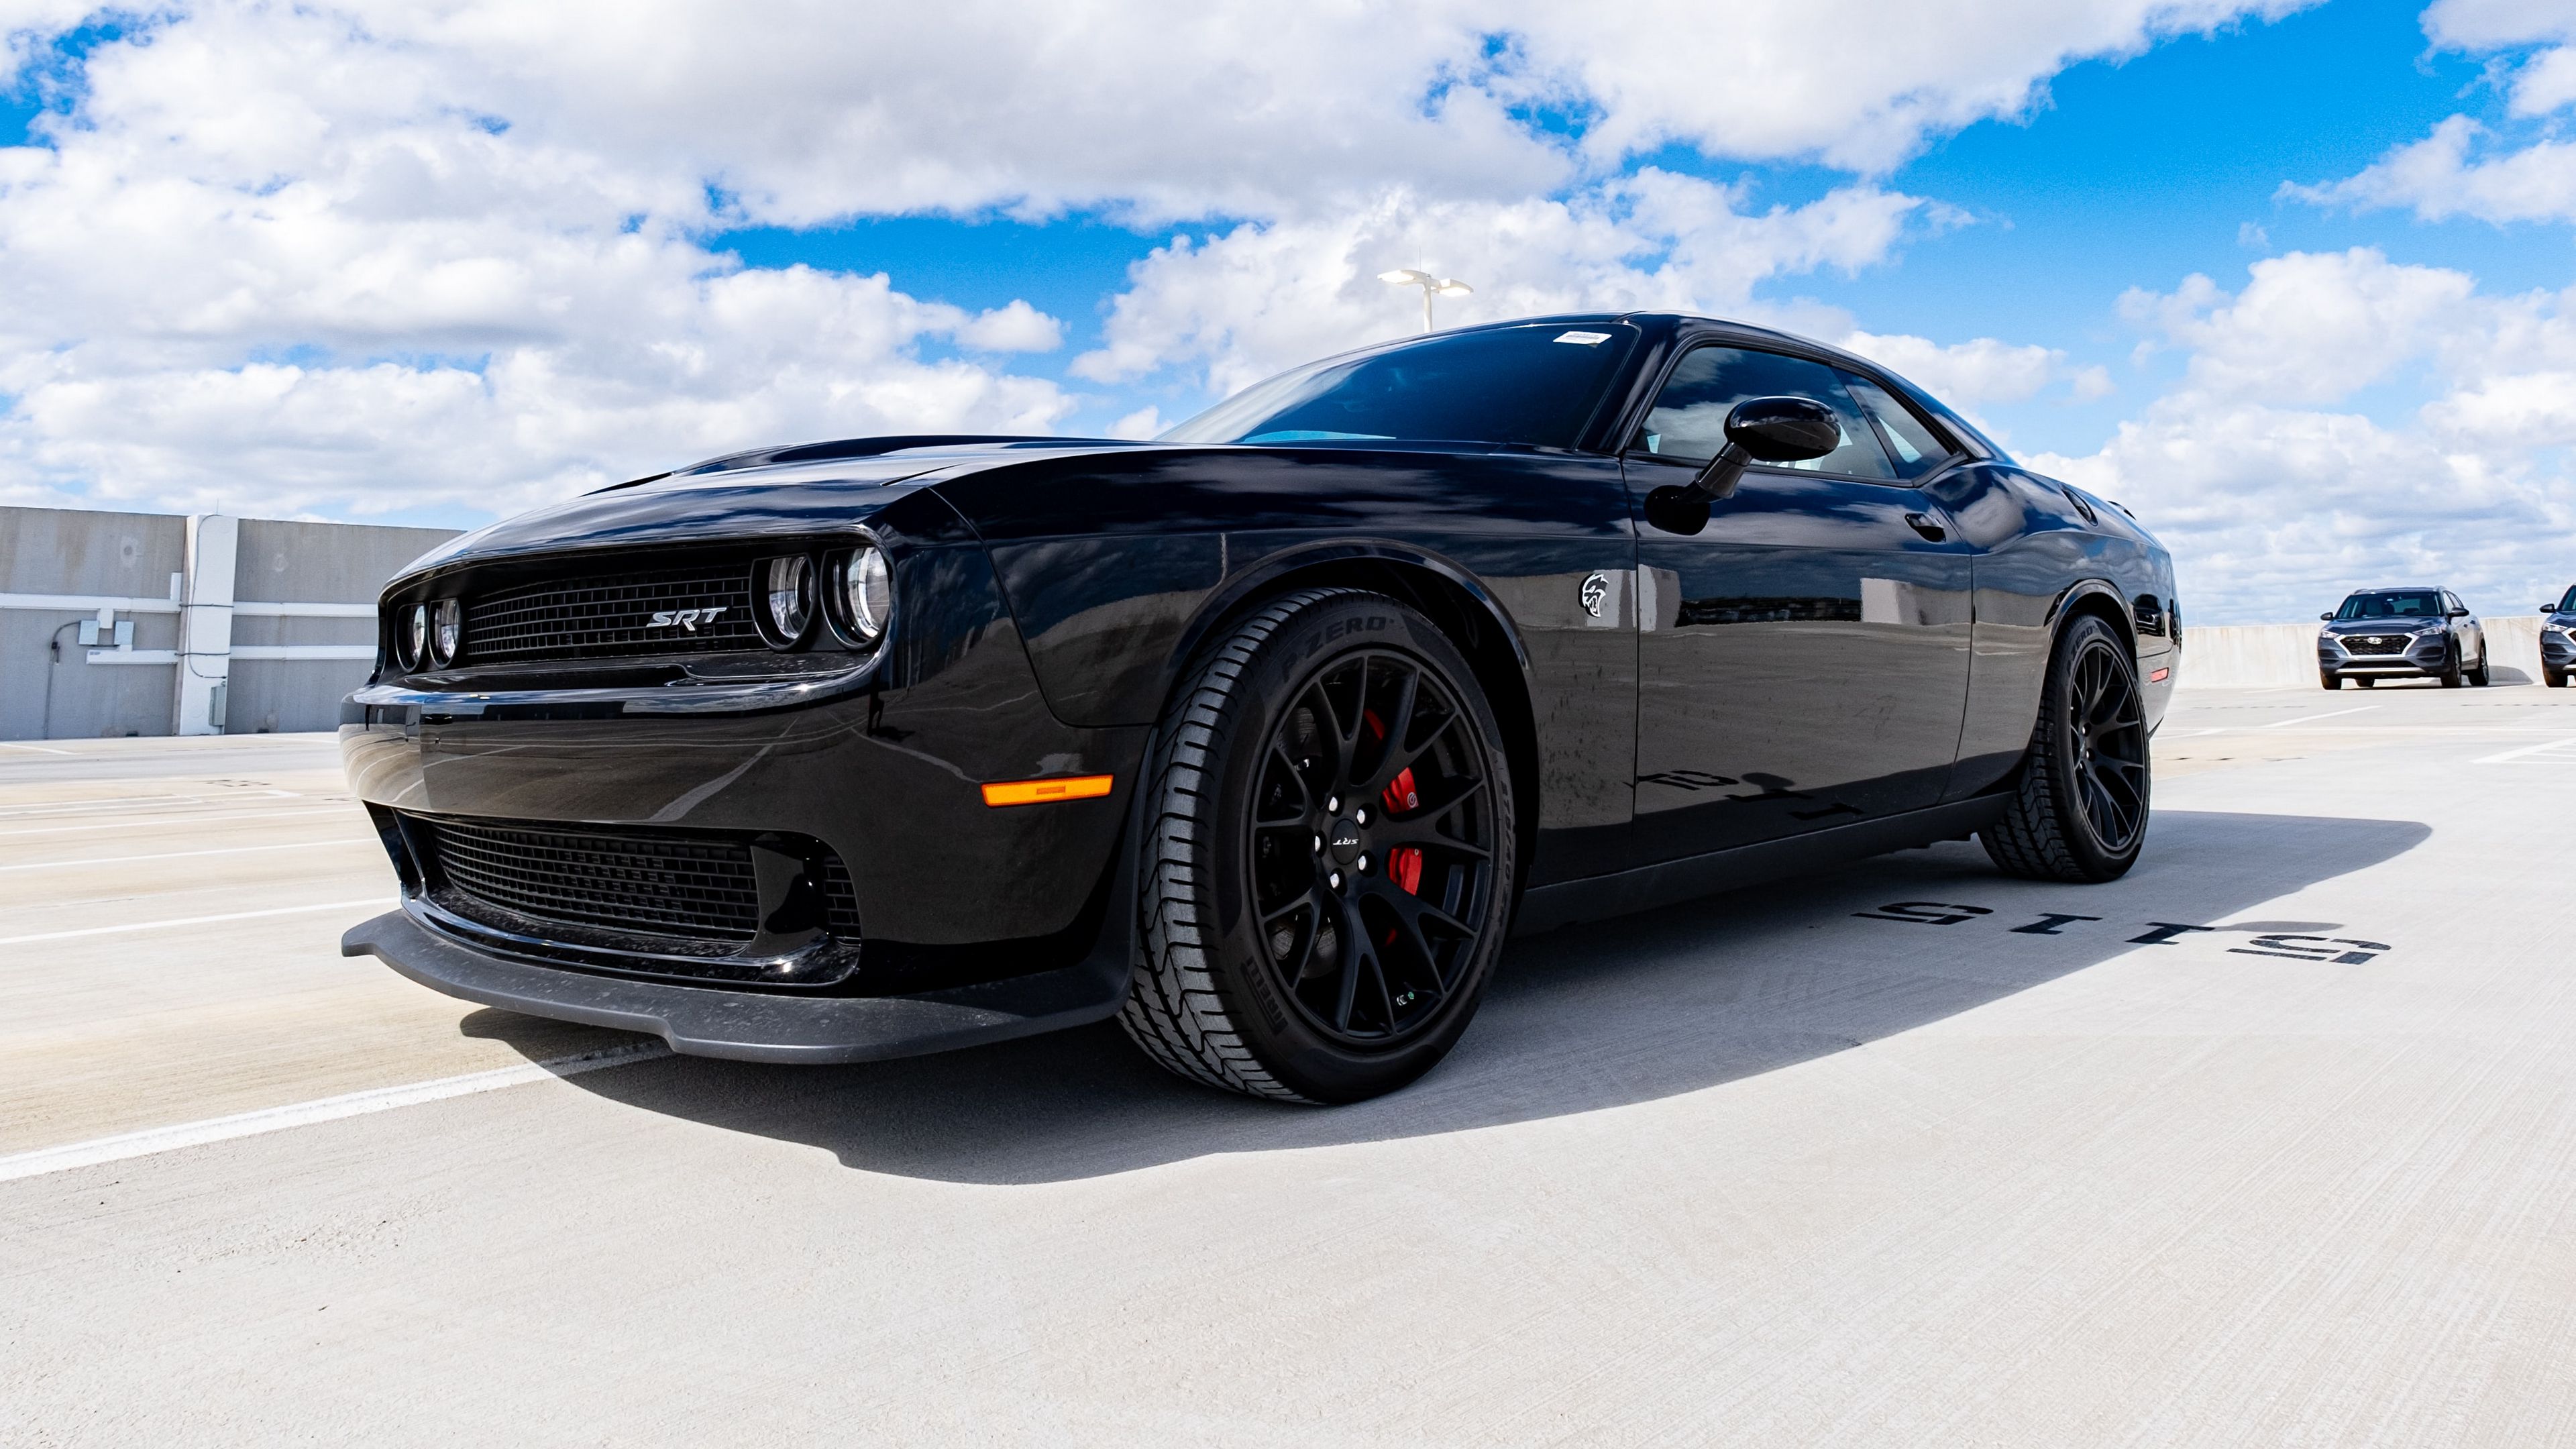 Dodge Wallpapers HD  Download Dodge Cars Wallpapers  DriveSpark